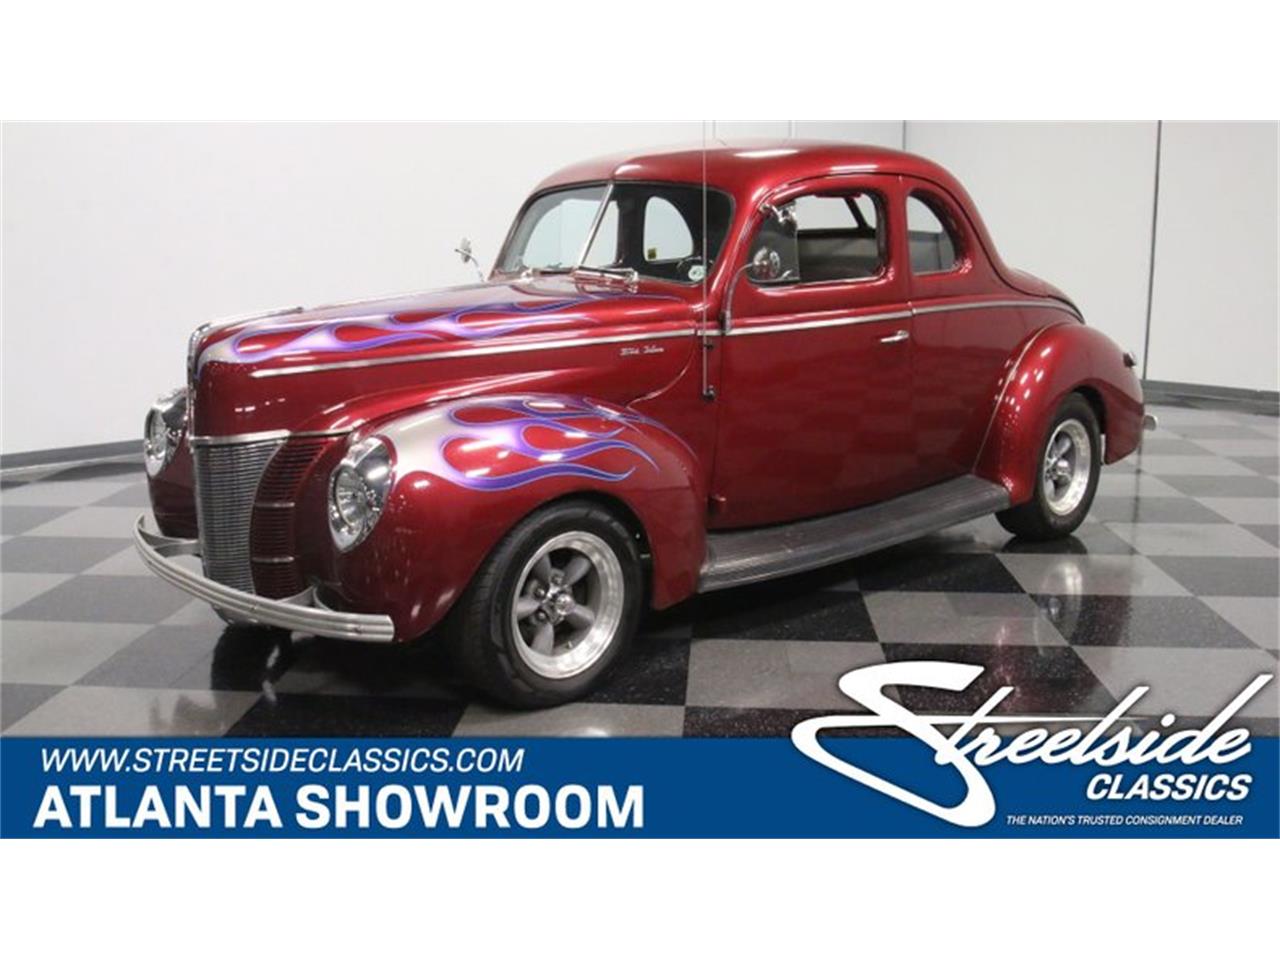 1940 Ford Coupe for sale in Lithia Springs, GA